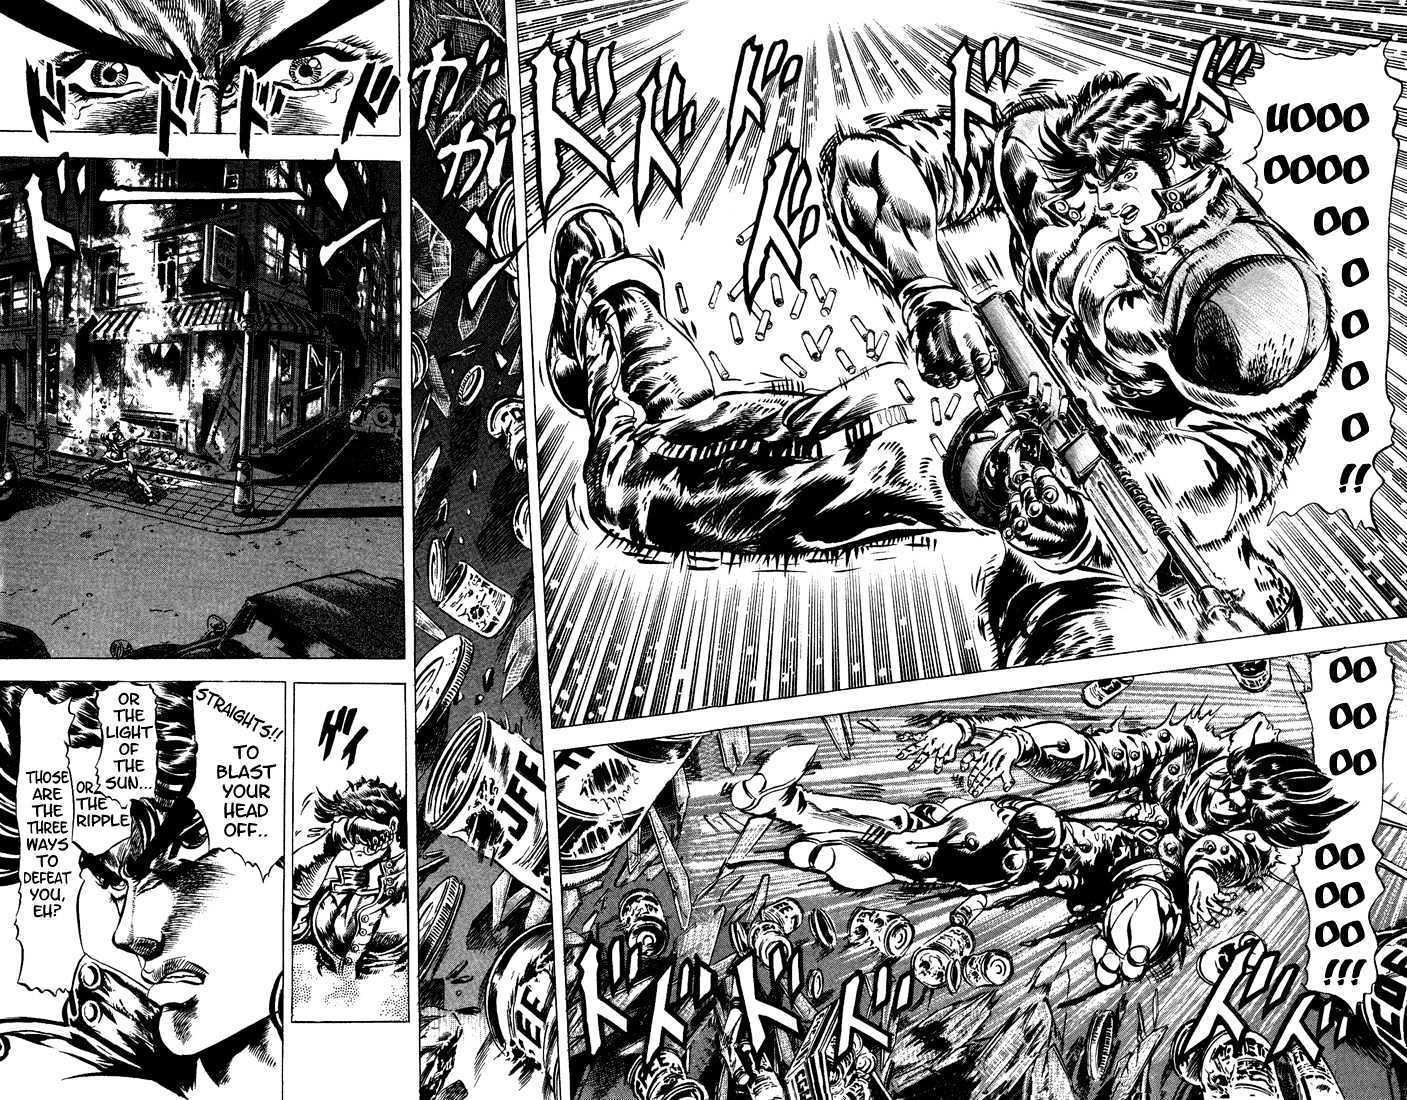 Jojo's Bizarre Adventure Vol.6 Chapter 49 : The Game Master page 2 - 